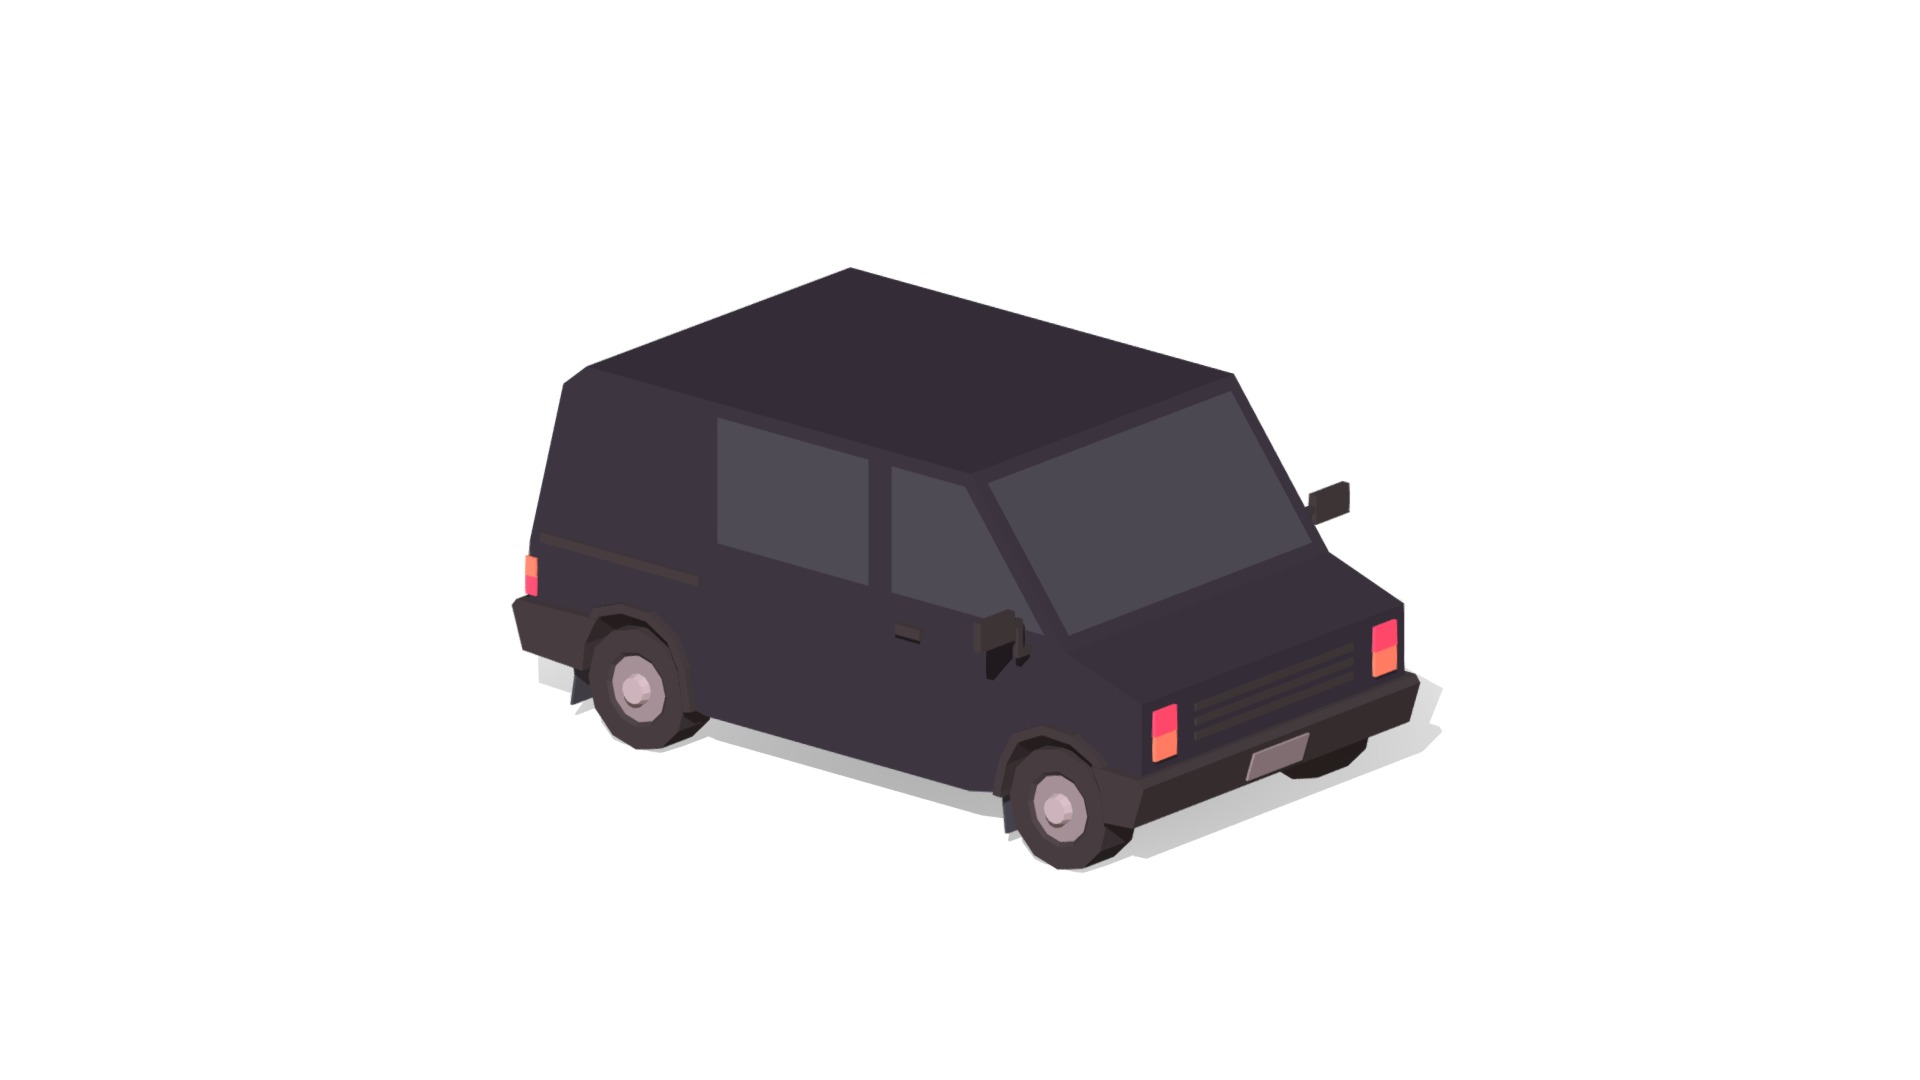 3D model Suspicious Van - This is a 3D model of the Suspicious Van. The 3D model is about a black van with red wheels.